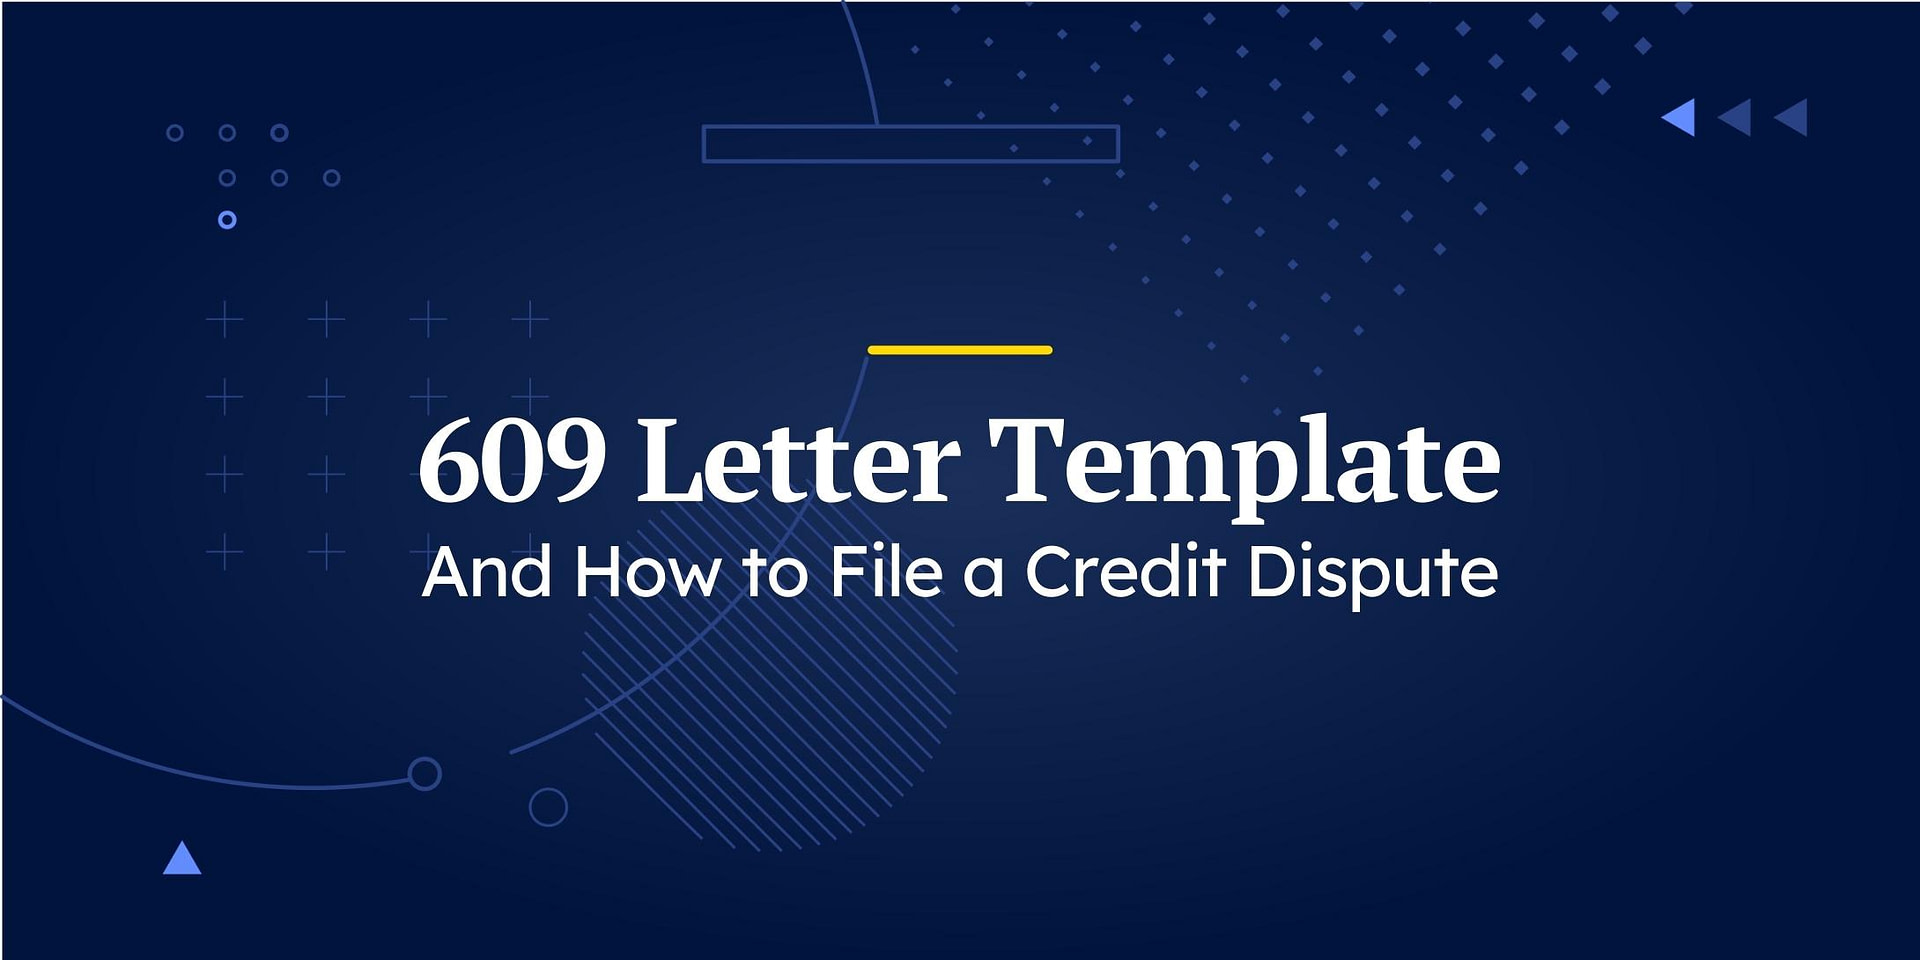 609 Letter Template & How to File a Credit Dispute